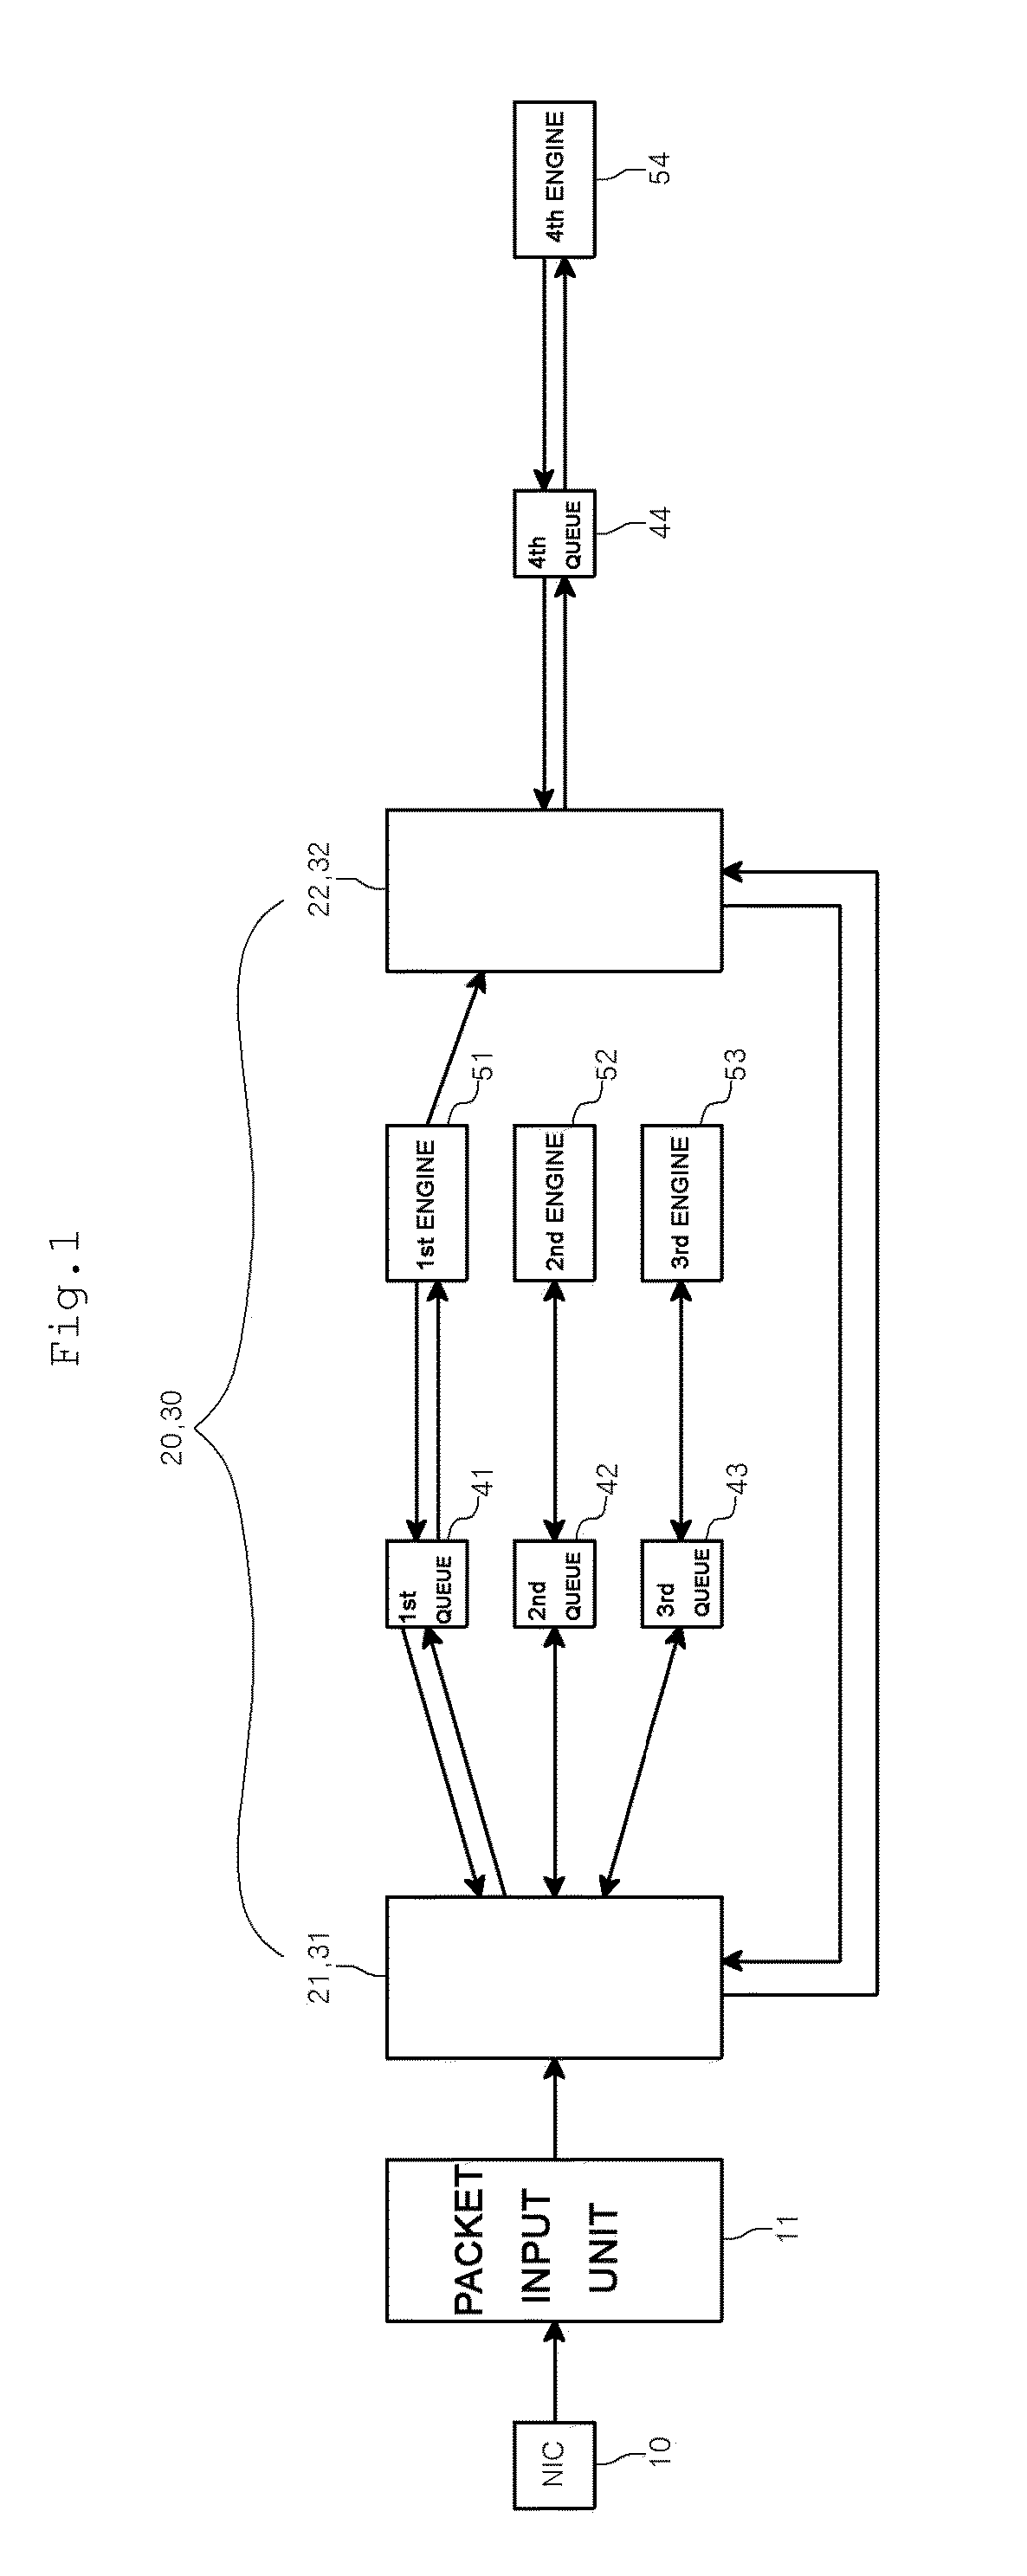 Packet transfer system and method for high-performance network equipment